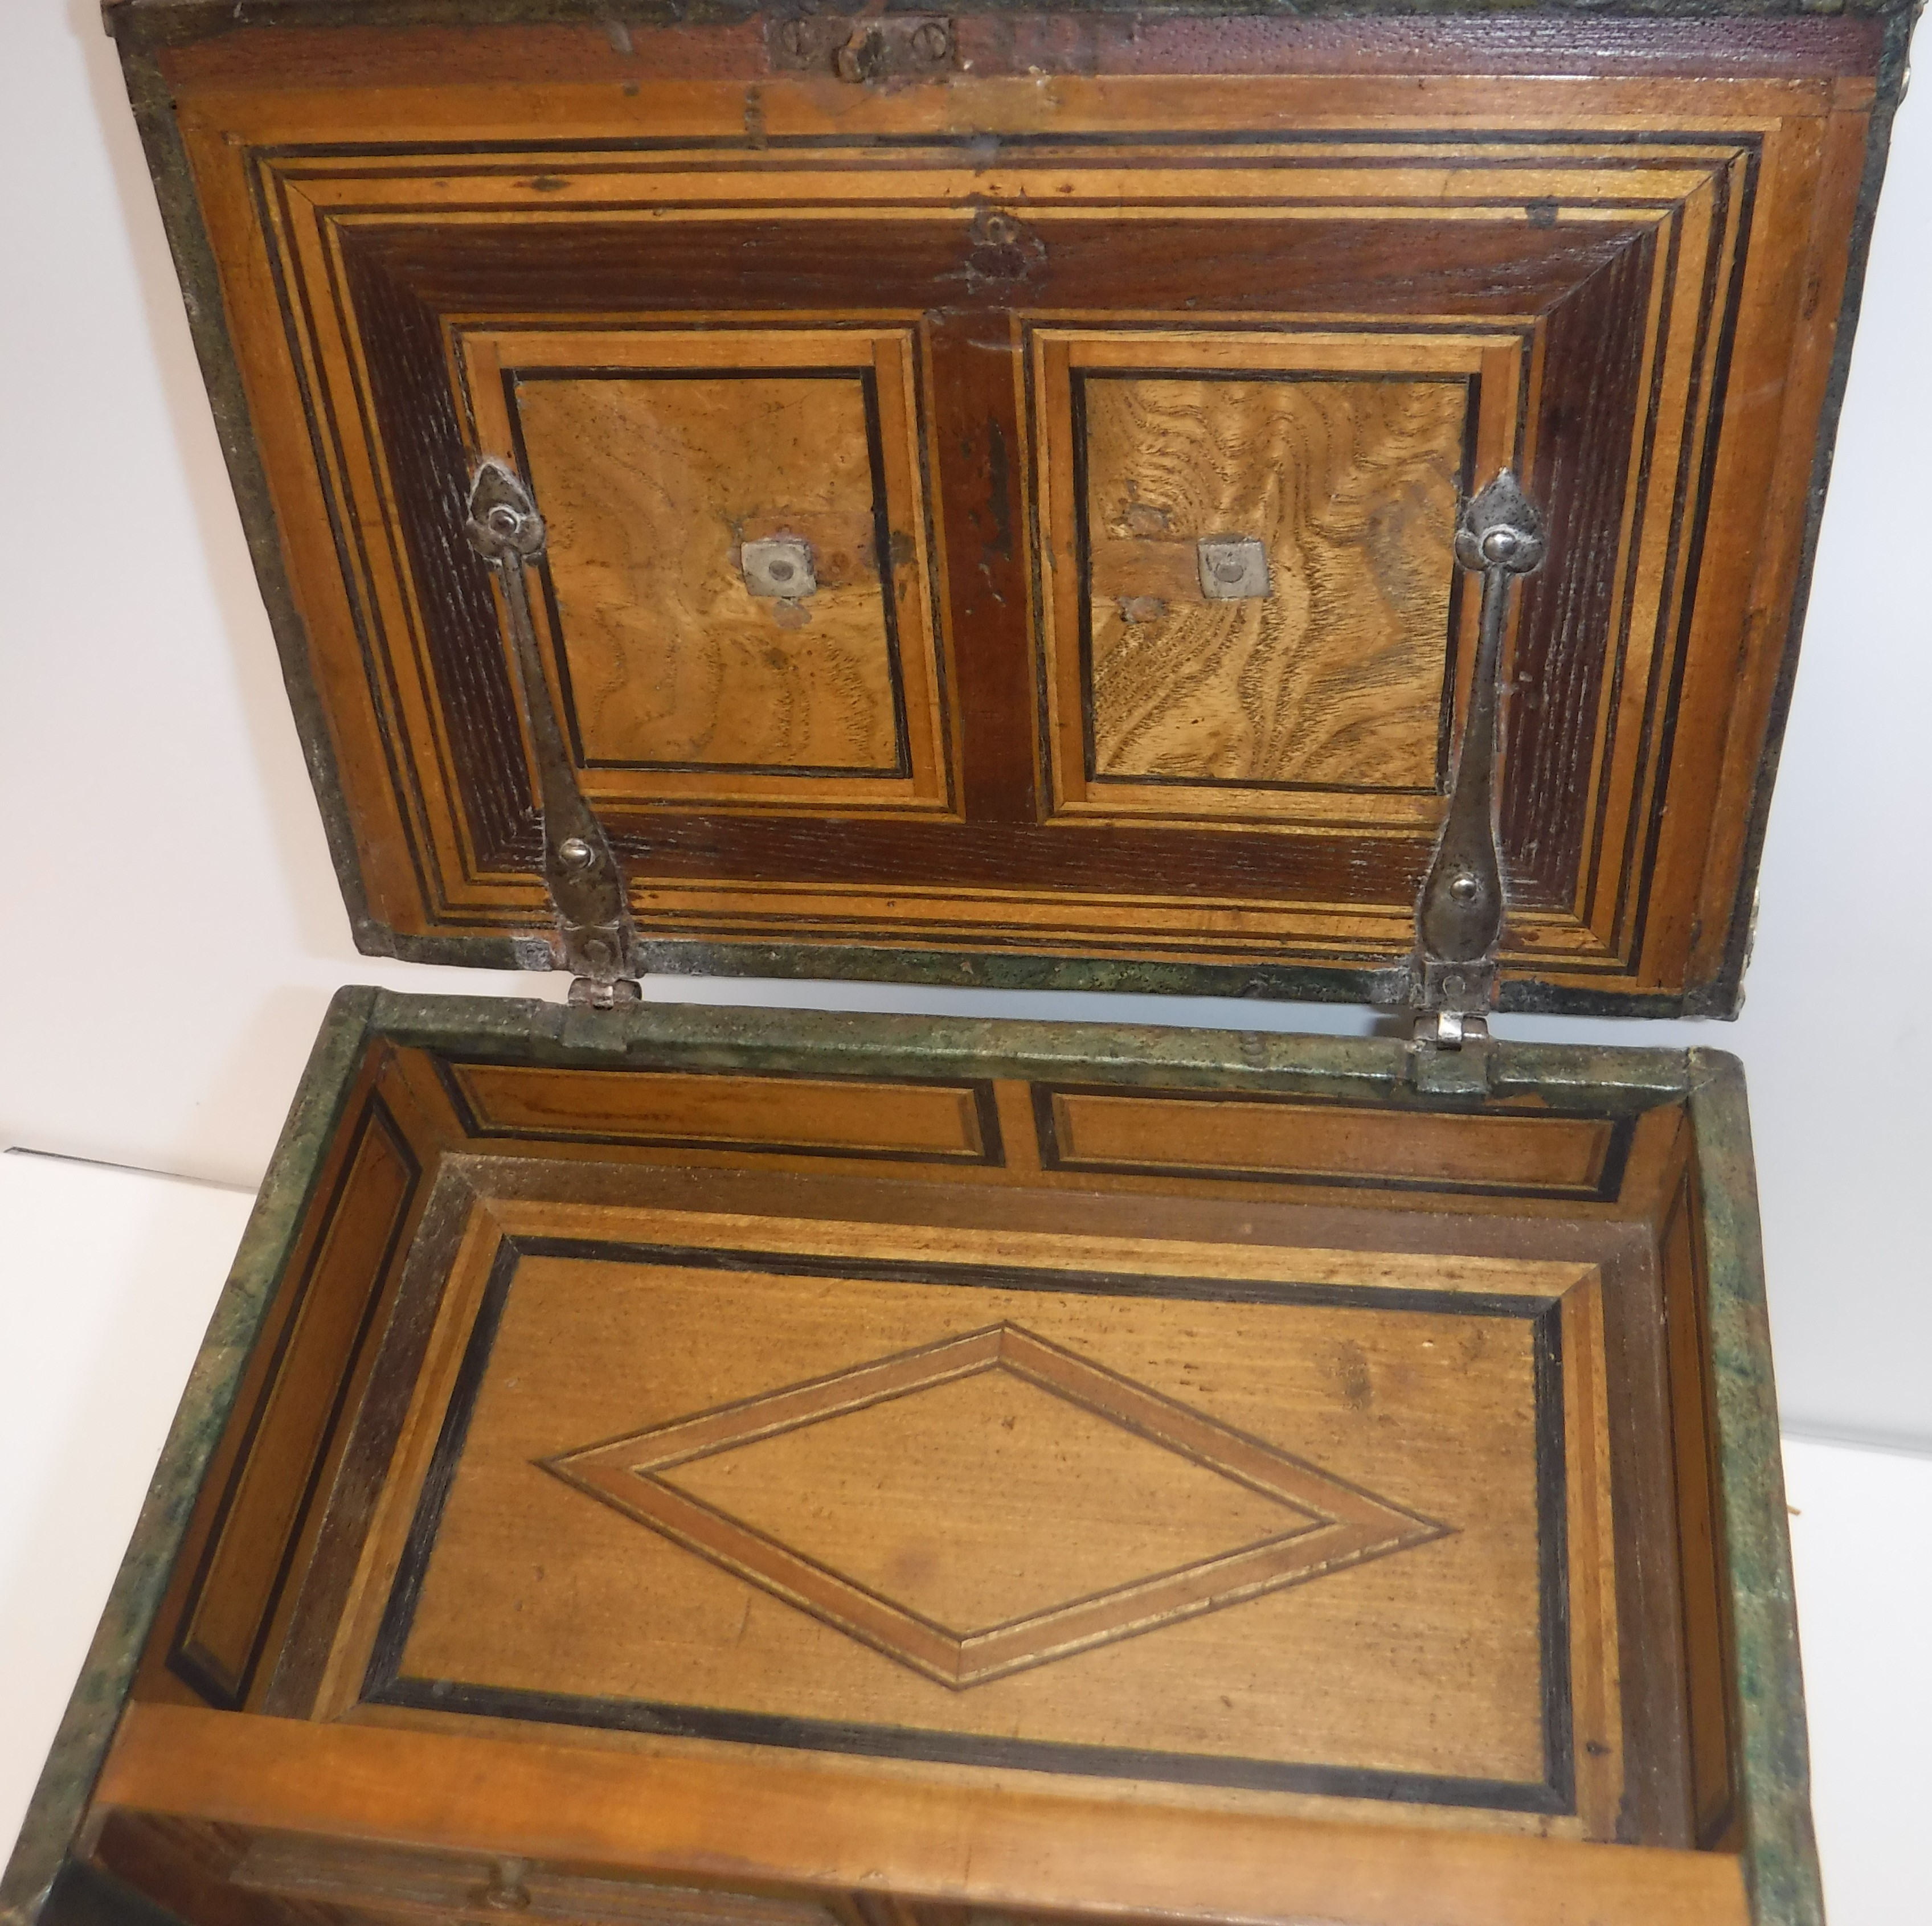 A 17th Century Augsburg table-top or tra - Image 10 of 42